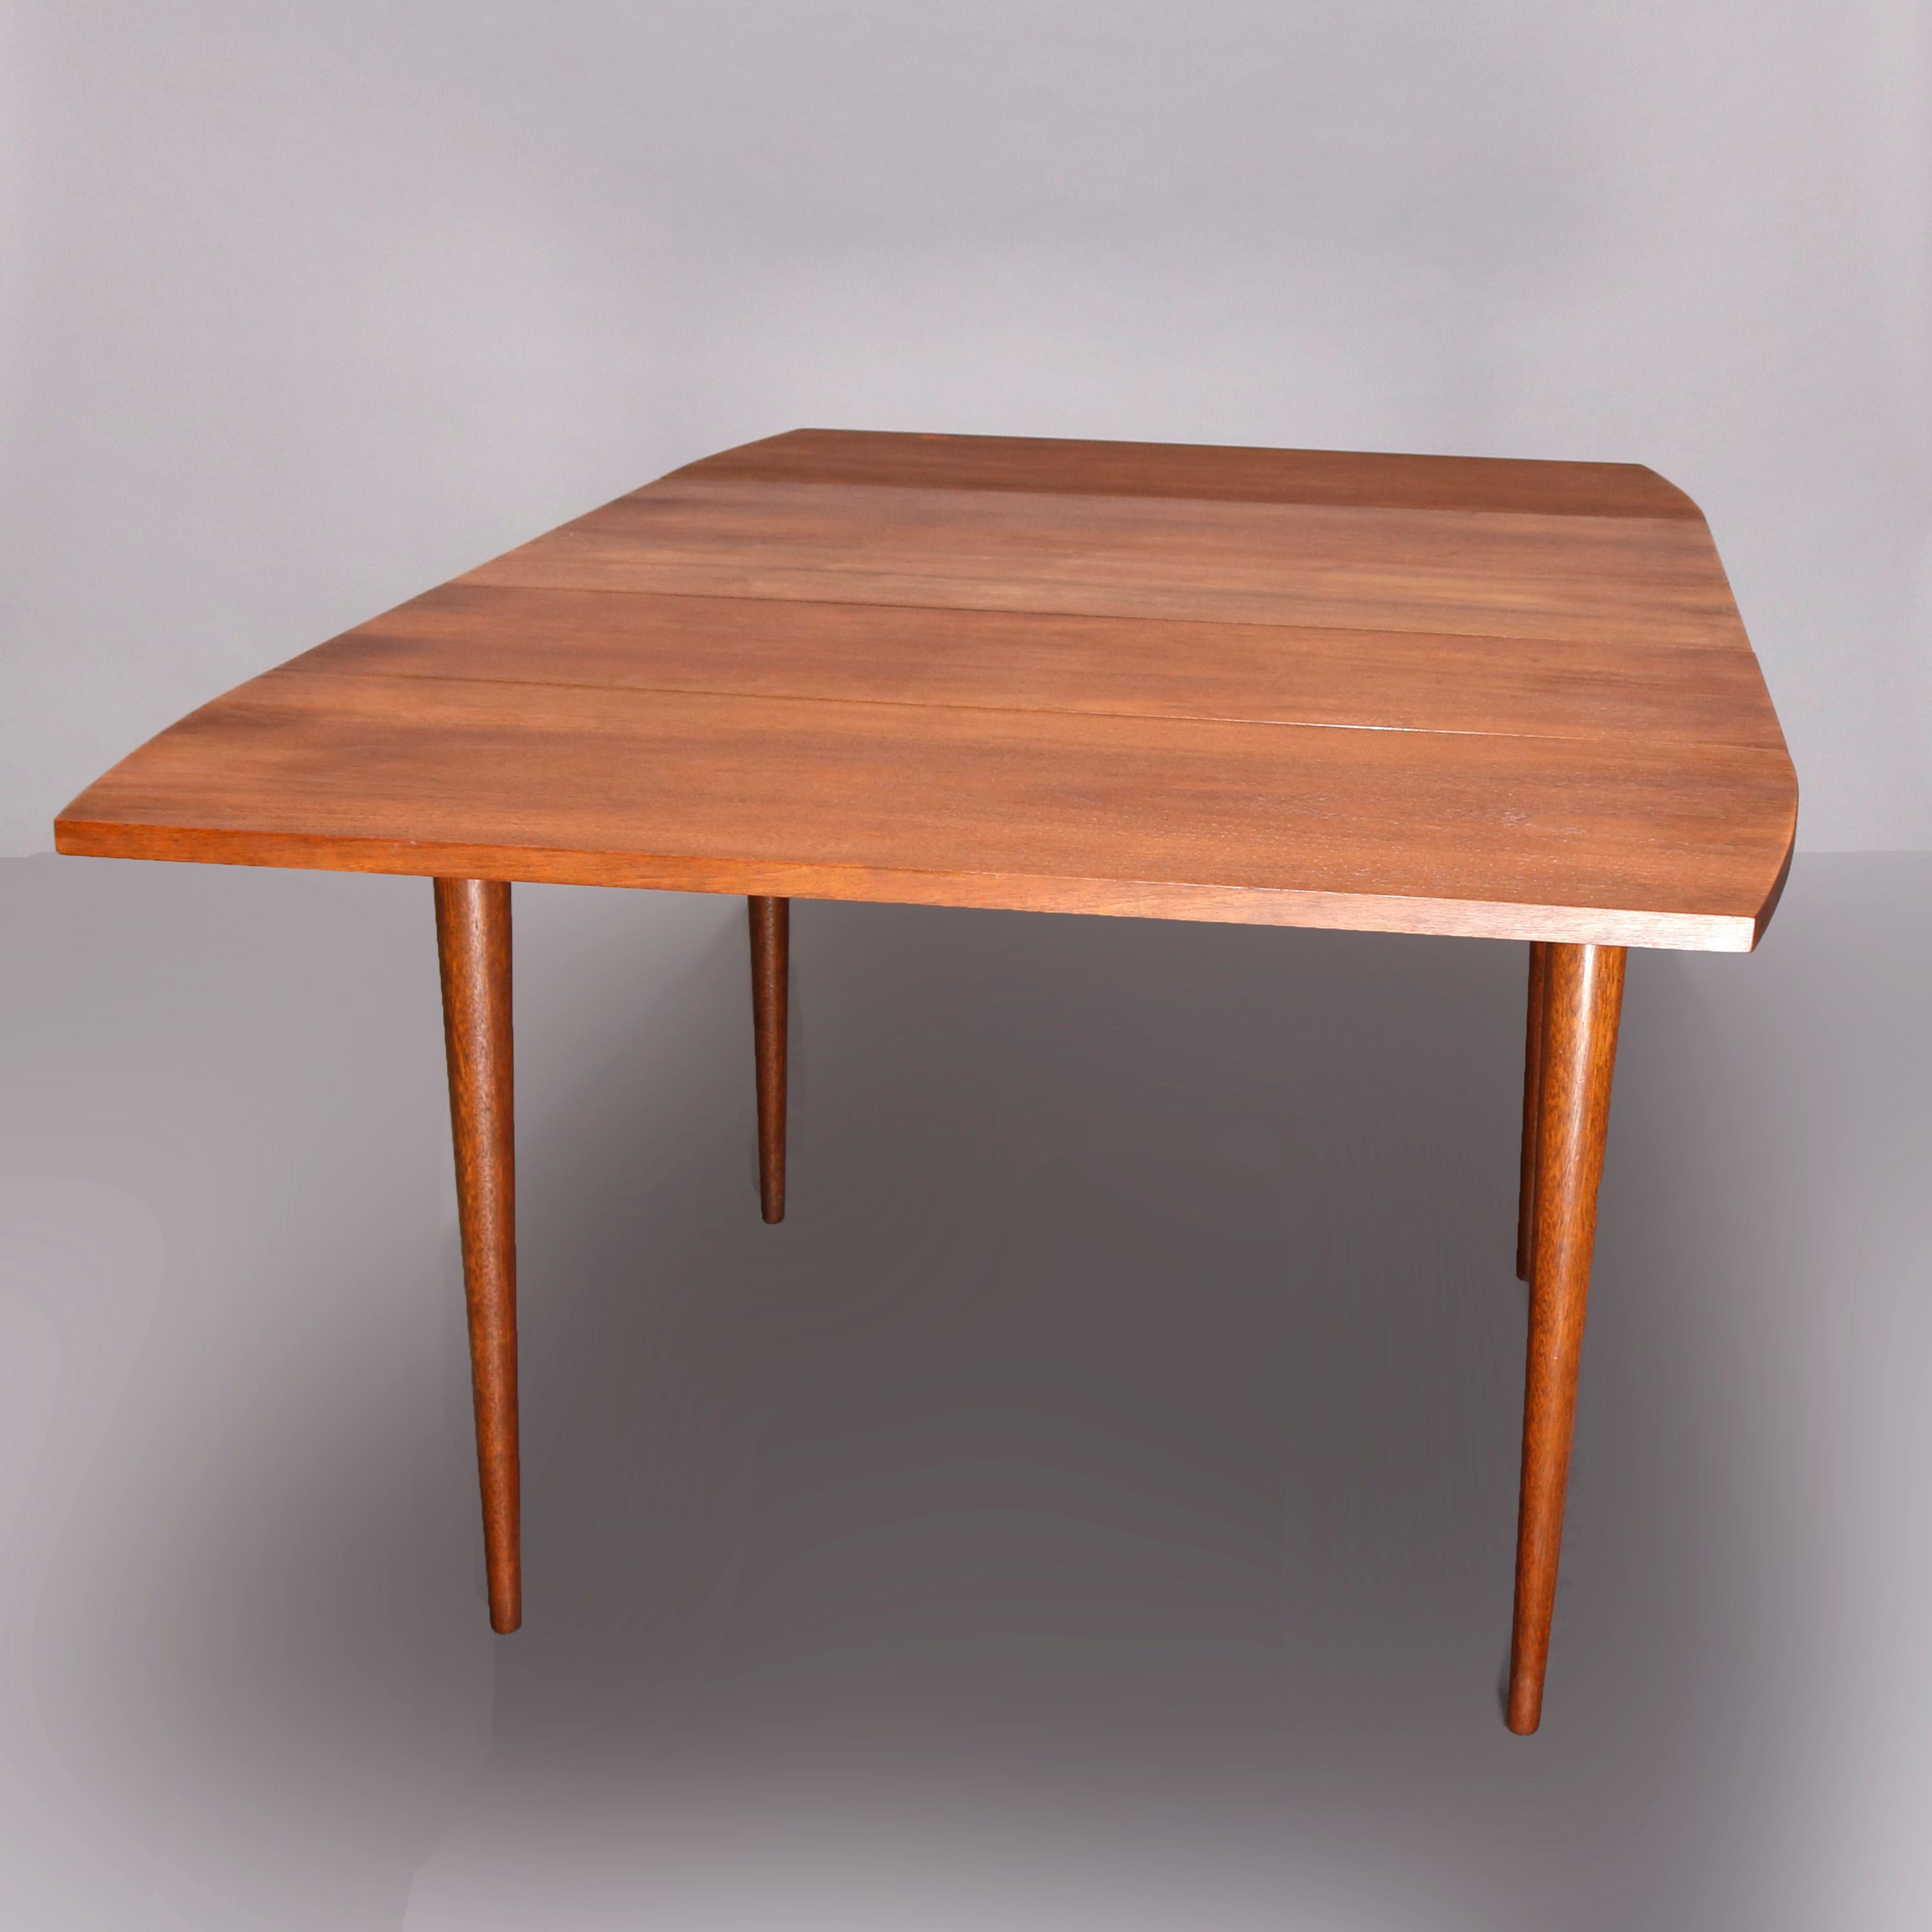 Midcentury Danish Modern Walnut Dining Table & Chairs by Broyhill, 20th Century 3